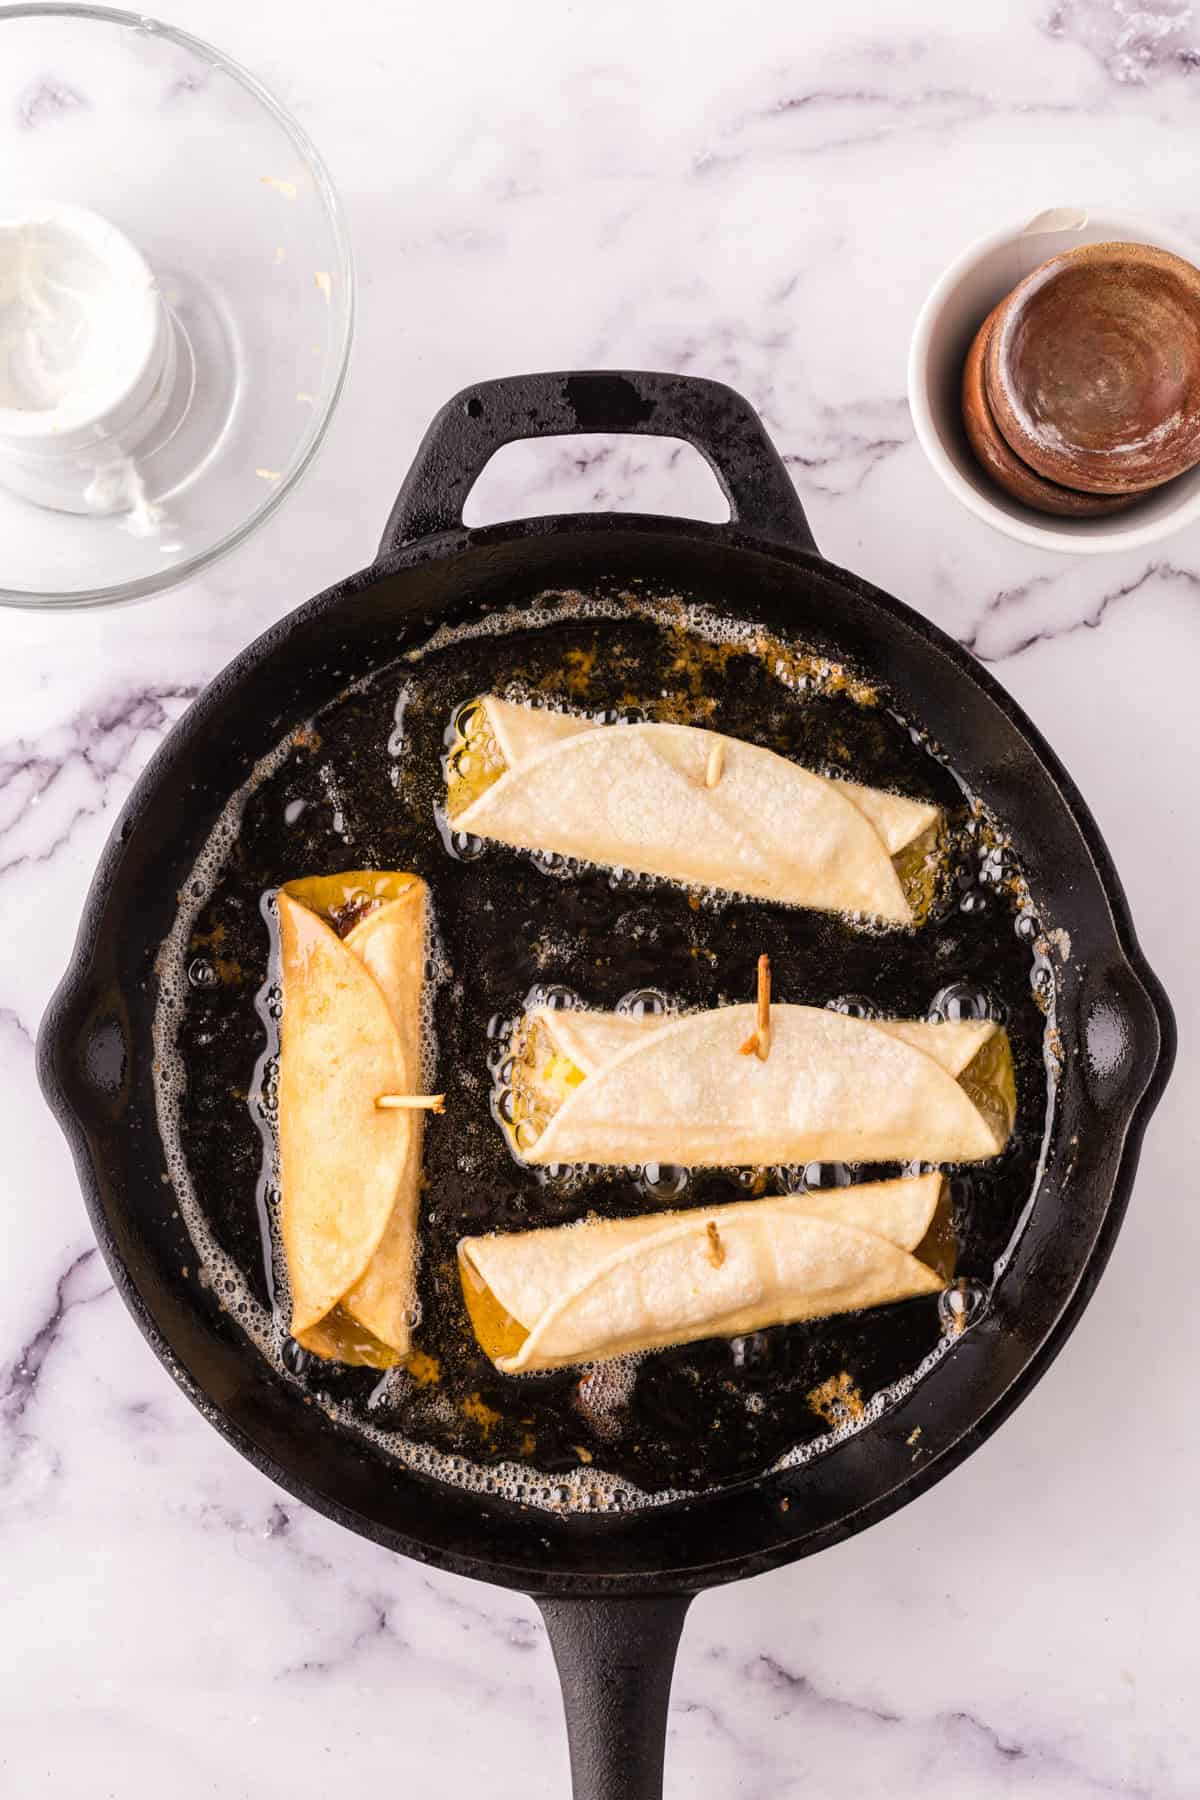 Frying the taquitos in hot oil.